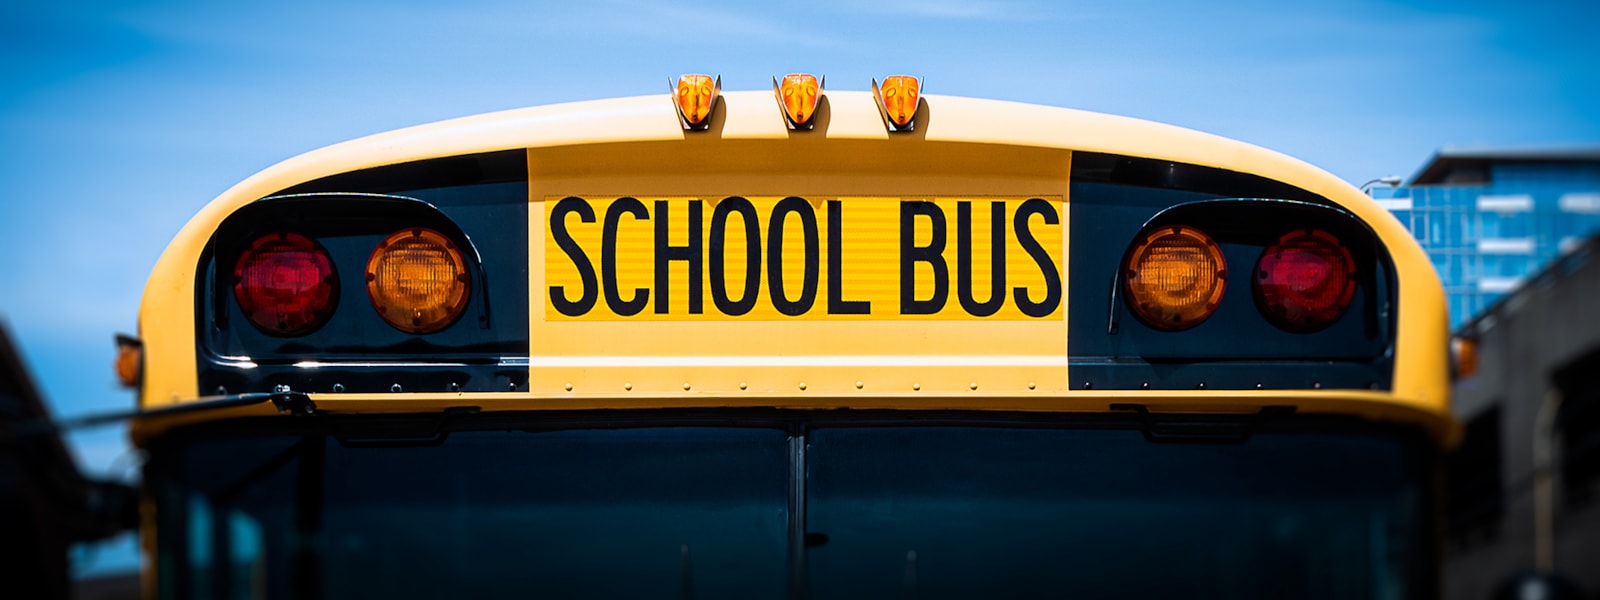 Picture of the front of a school bus